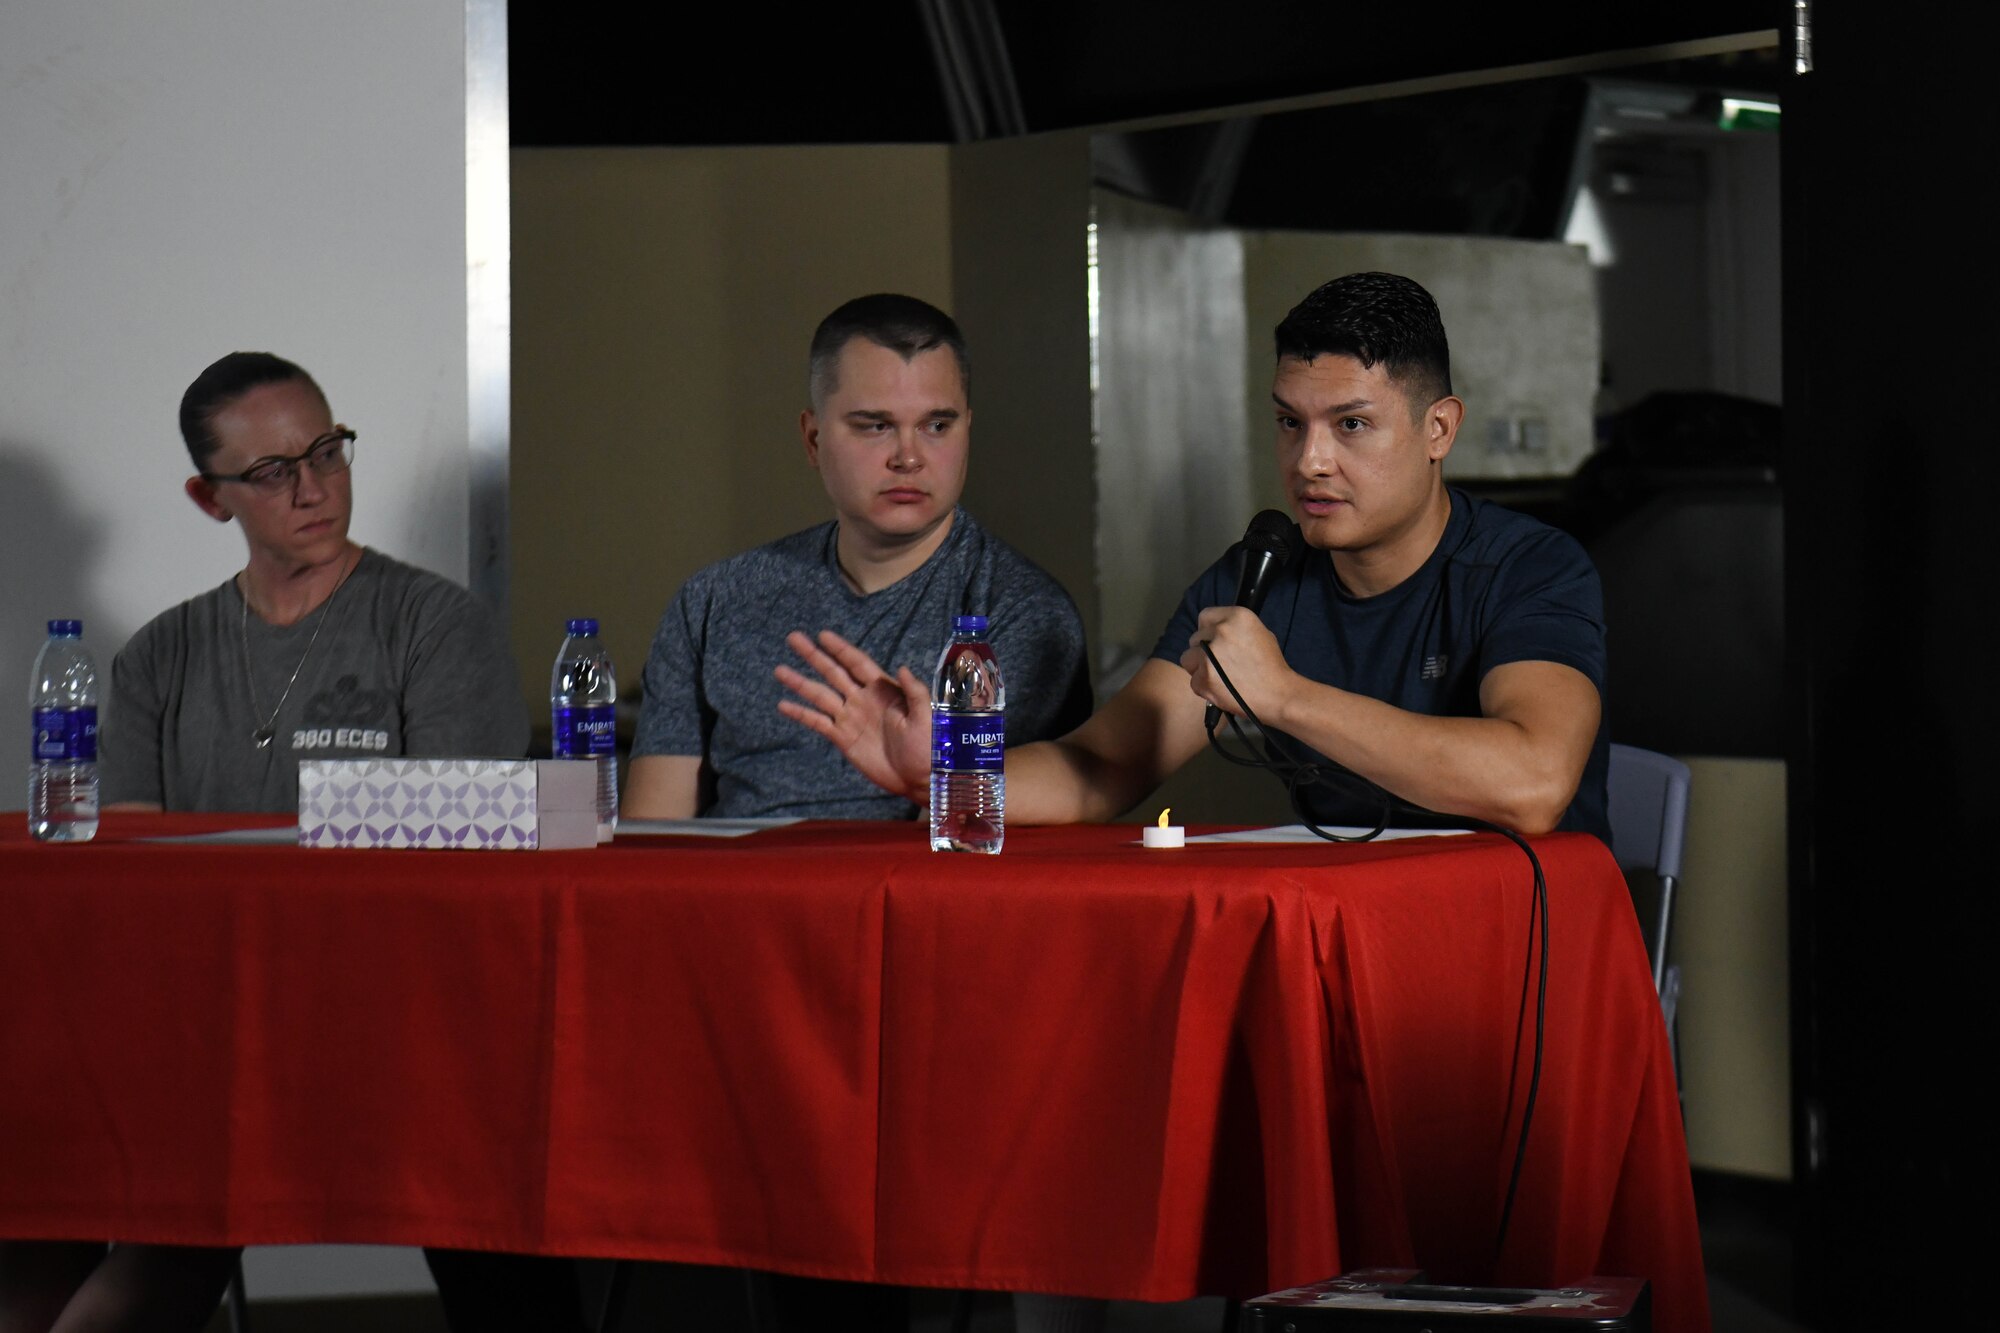 Six Airmen assigned to the 380th Air Expeditionary Wing stepped forward to share their own experiences of hardship and resiliency during a “Storytellers” event, September 21, 2022, at Al Dhafra Air Base, United Arab Emirates. Airmen spoke about their struggle with life, faith, suicide, the loss of a child, alcoholism, the war in Ukraine and sexual assault.